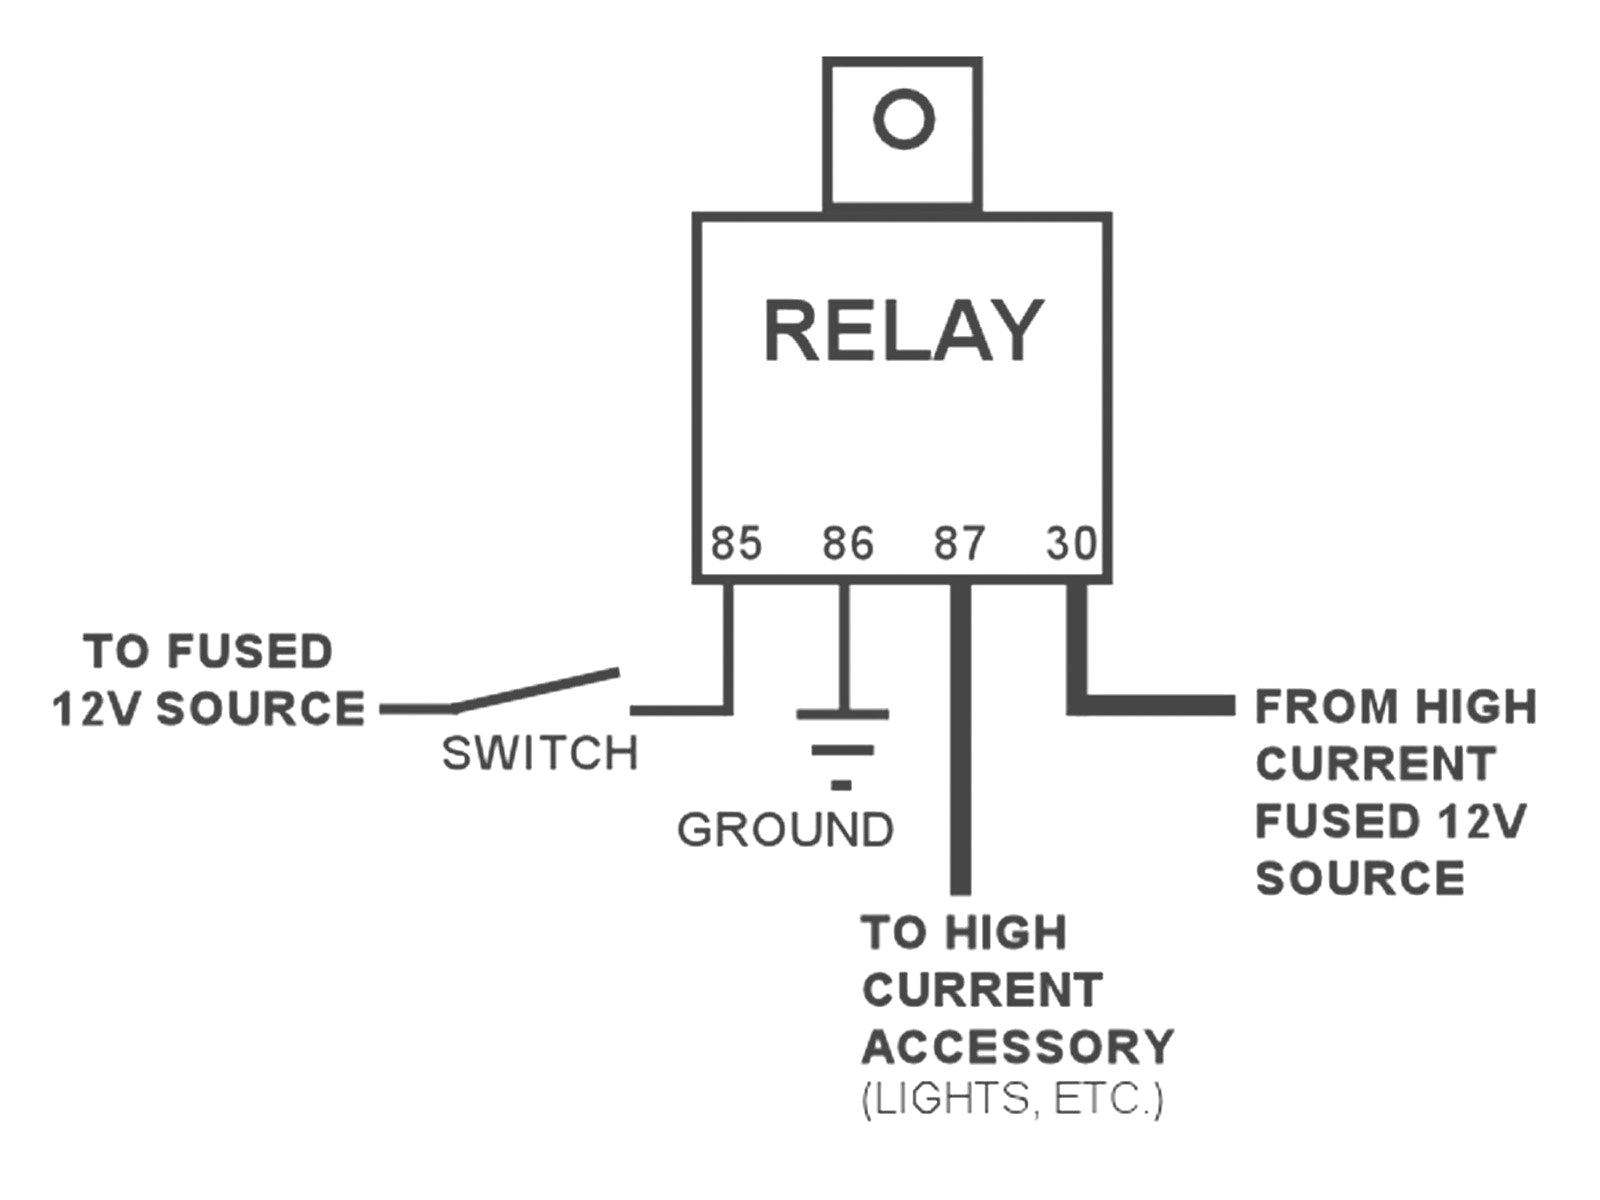 wiring diagram 12v relay wiring diagram for you 12v relay wiring diagram manual e book 12v